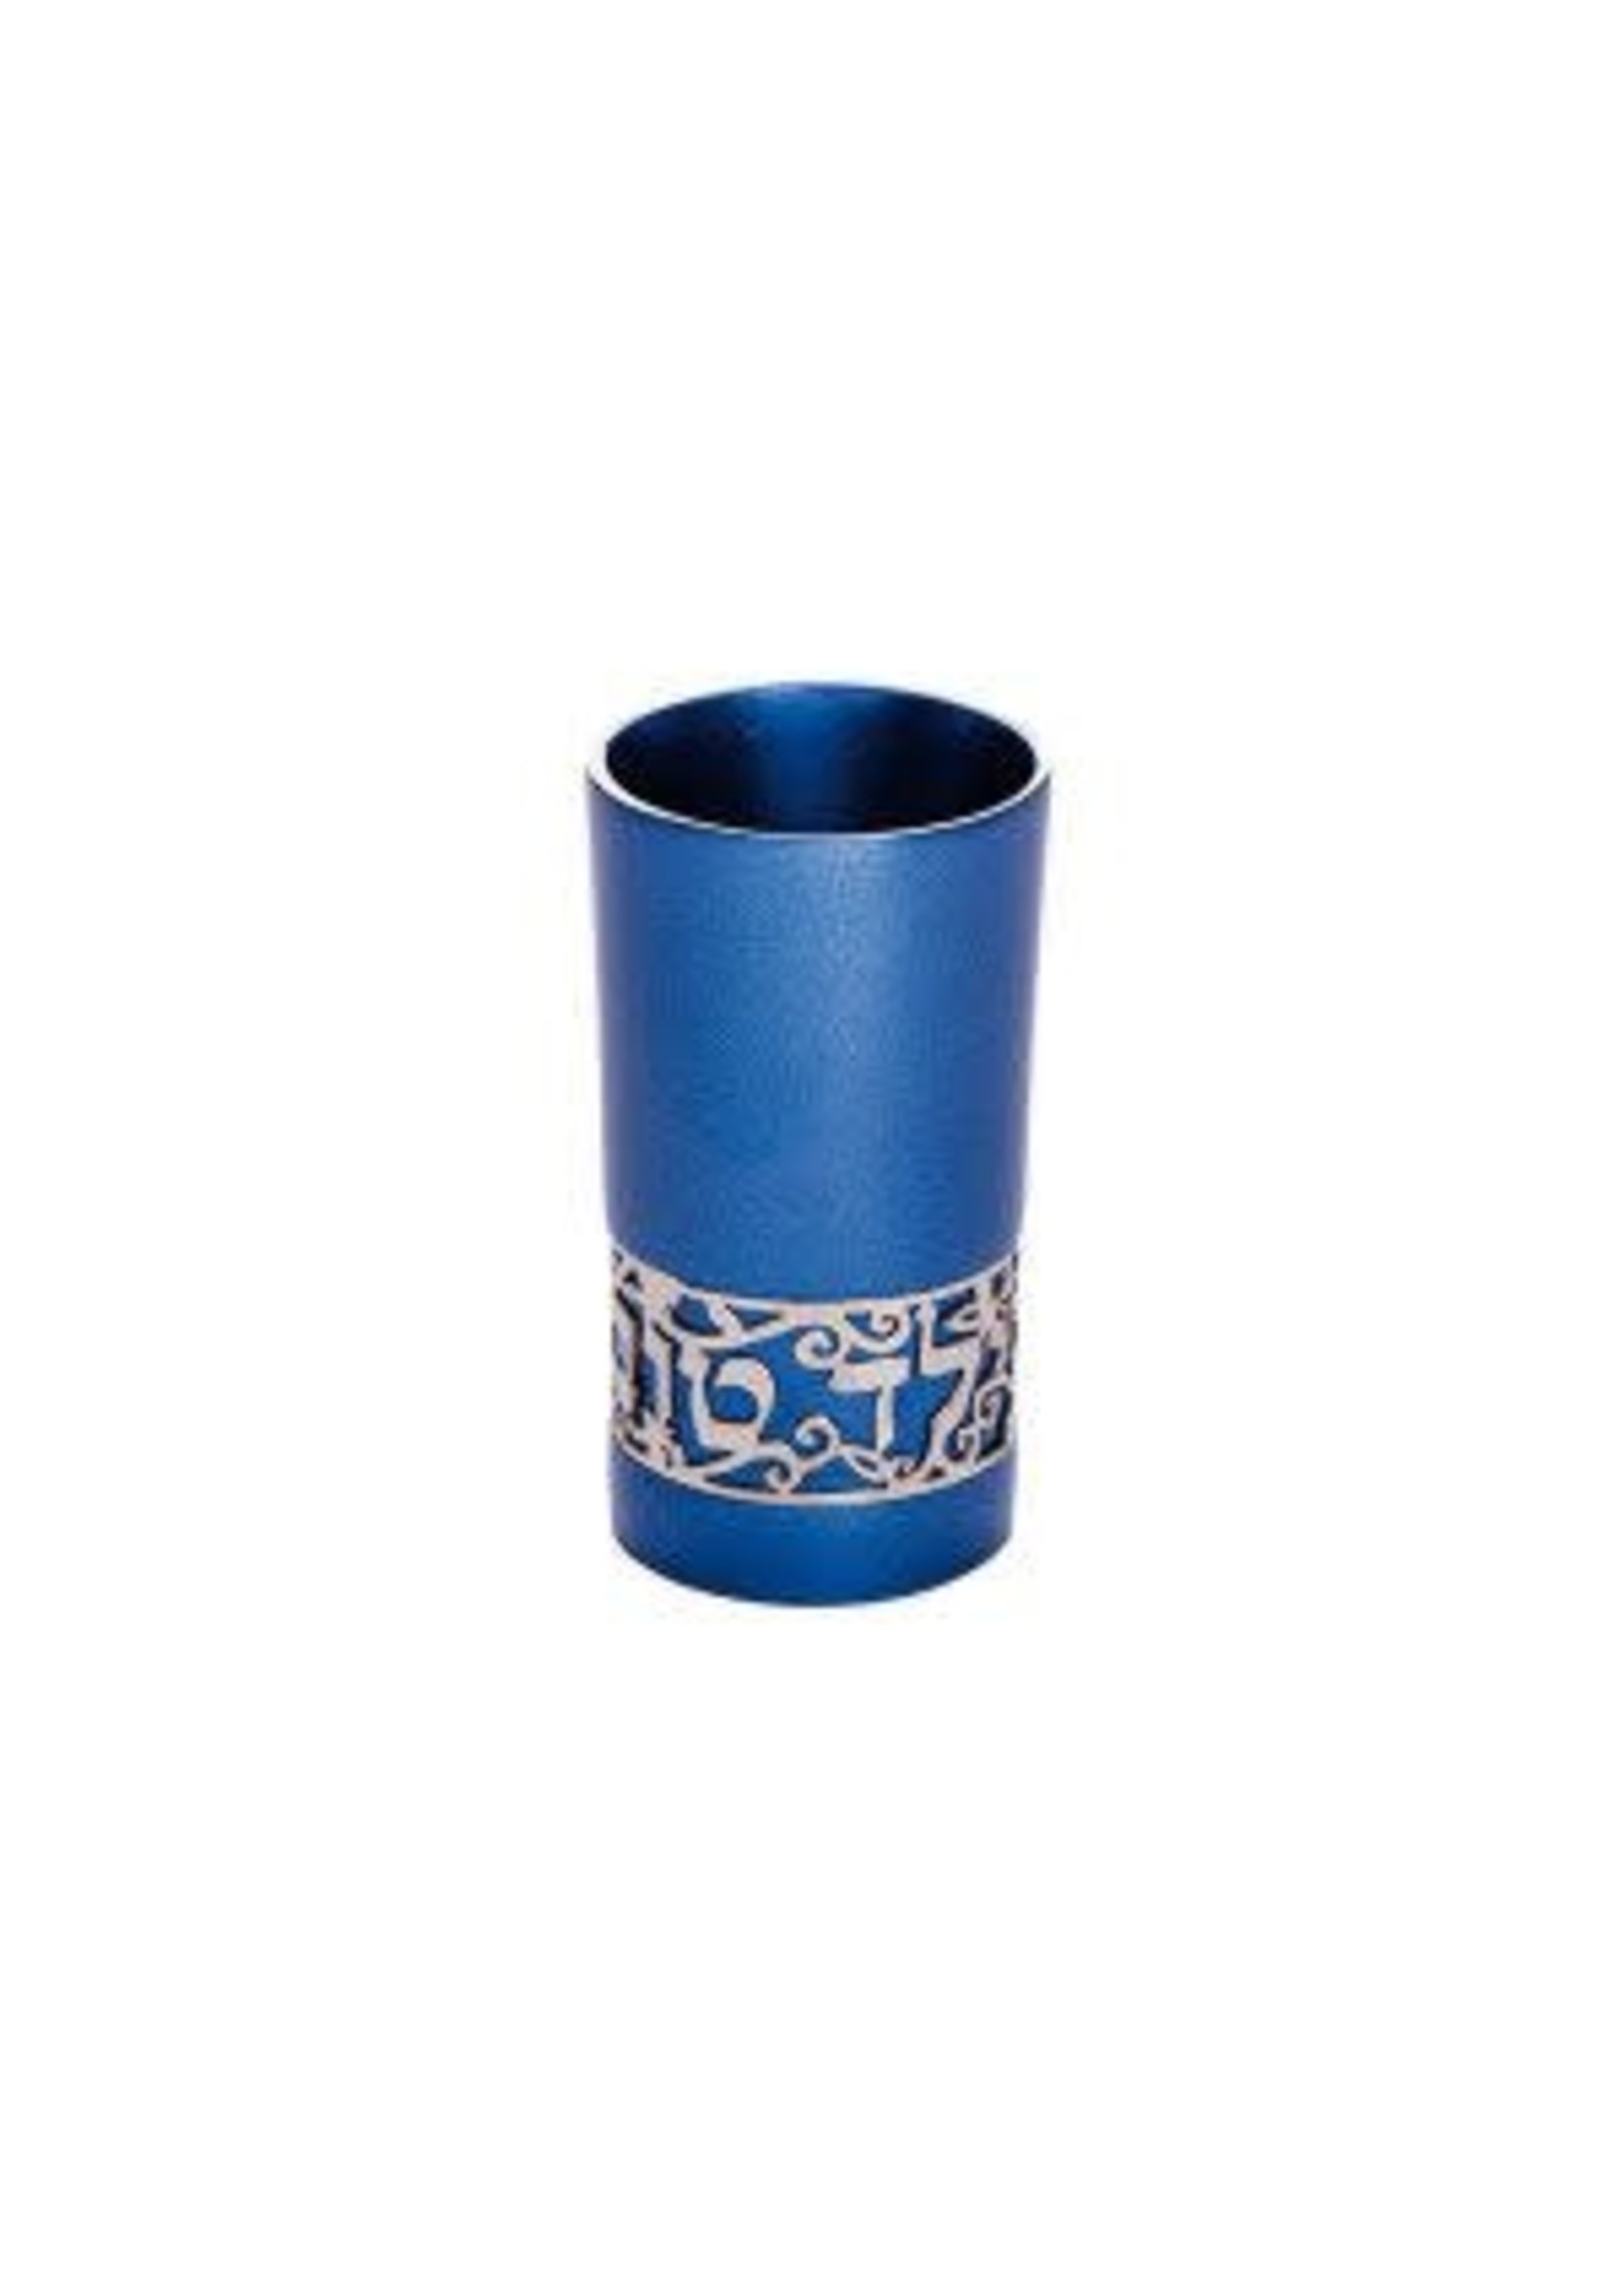 YELED TOV CUP BLUE SILVER LACE